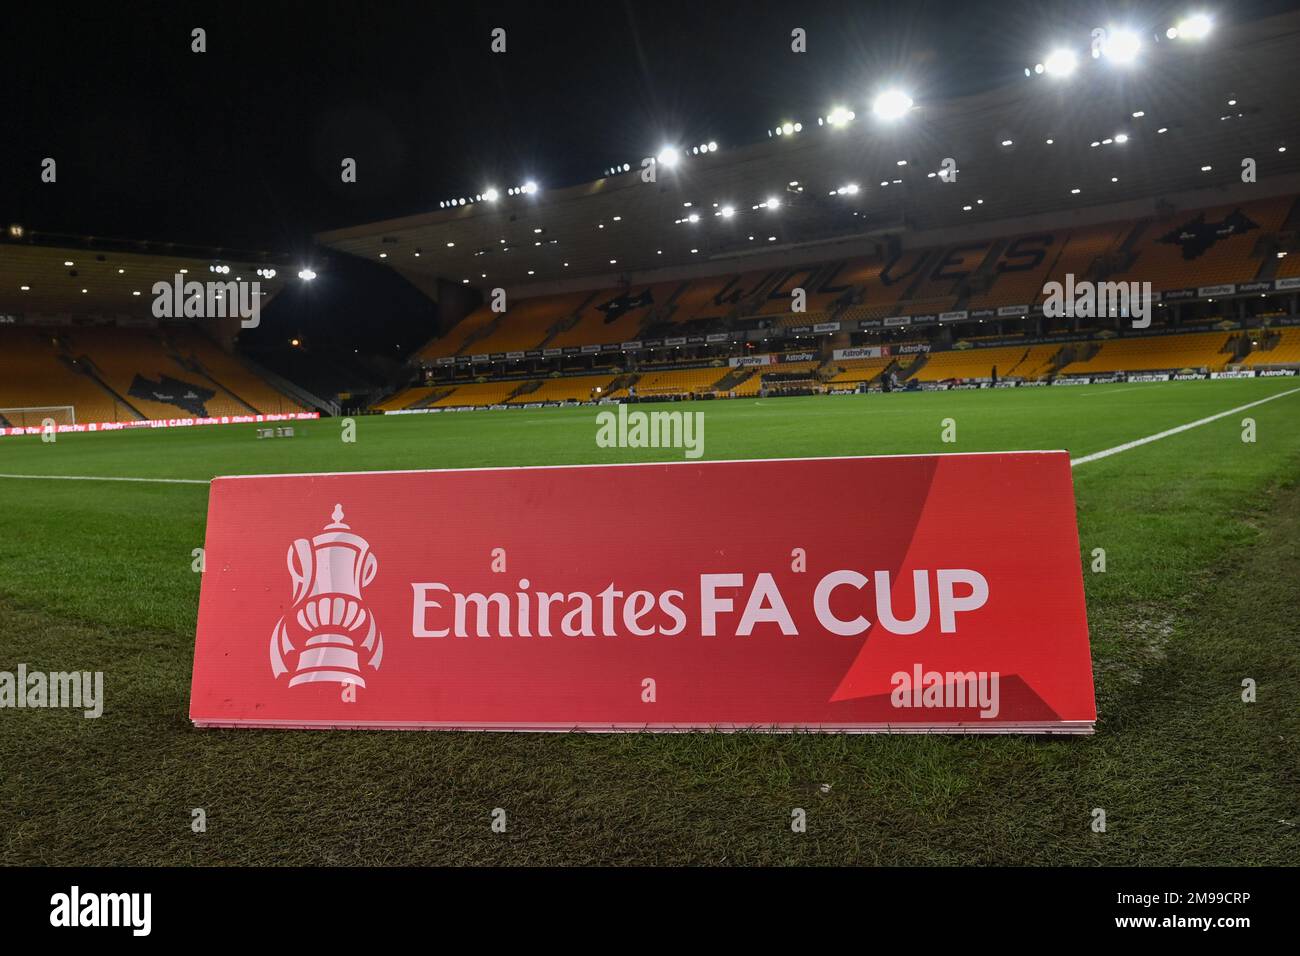 An Emirates FA Cup branded banner at Molineux during the Emirates FA Cup Third Round Replay match Wolverhampton Wanderers vs Liverpool at Molineux, Wolverhampton, United Kingdom, 17th January 2023  (Photo by Craig Thomas/News Images) Stock Photo